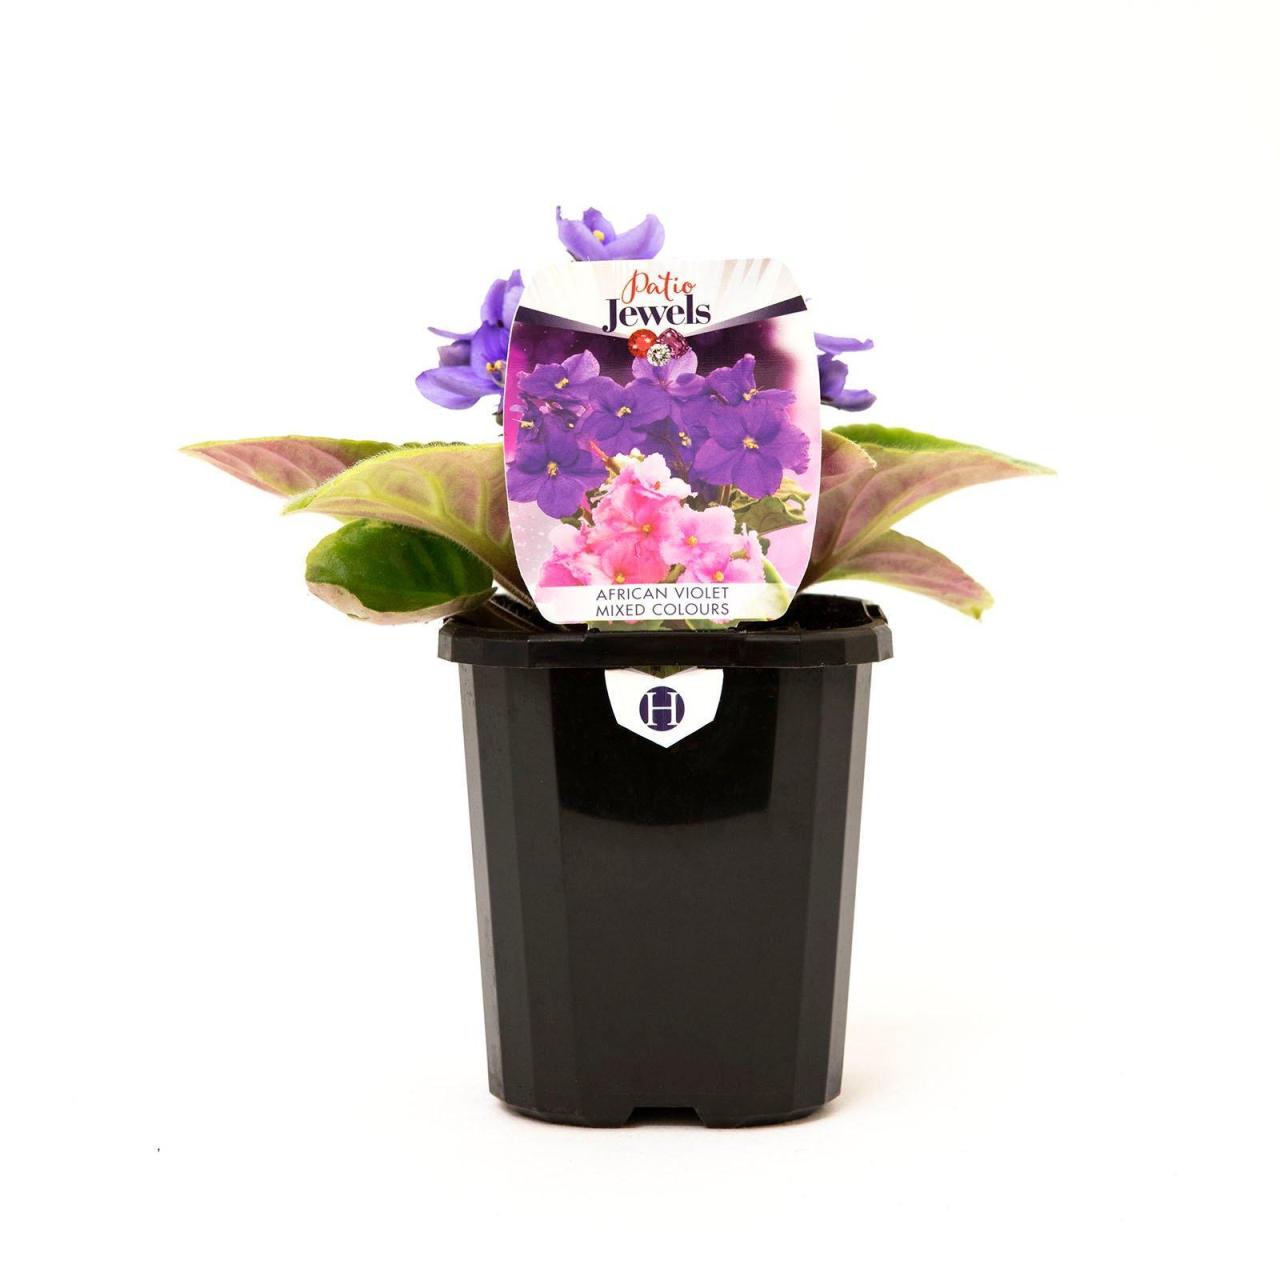 Hanging Plants Indoor | African Violet Soil Bunnings: A Guide to Growing Thriving Violets